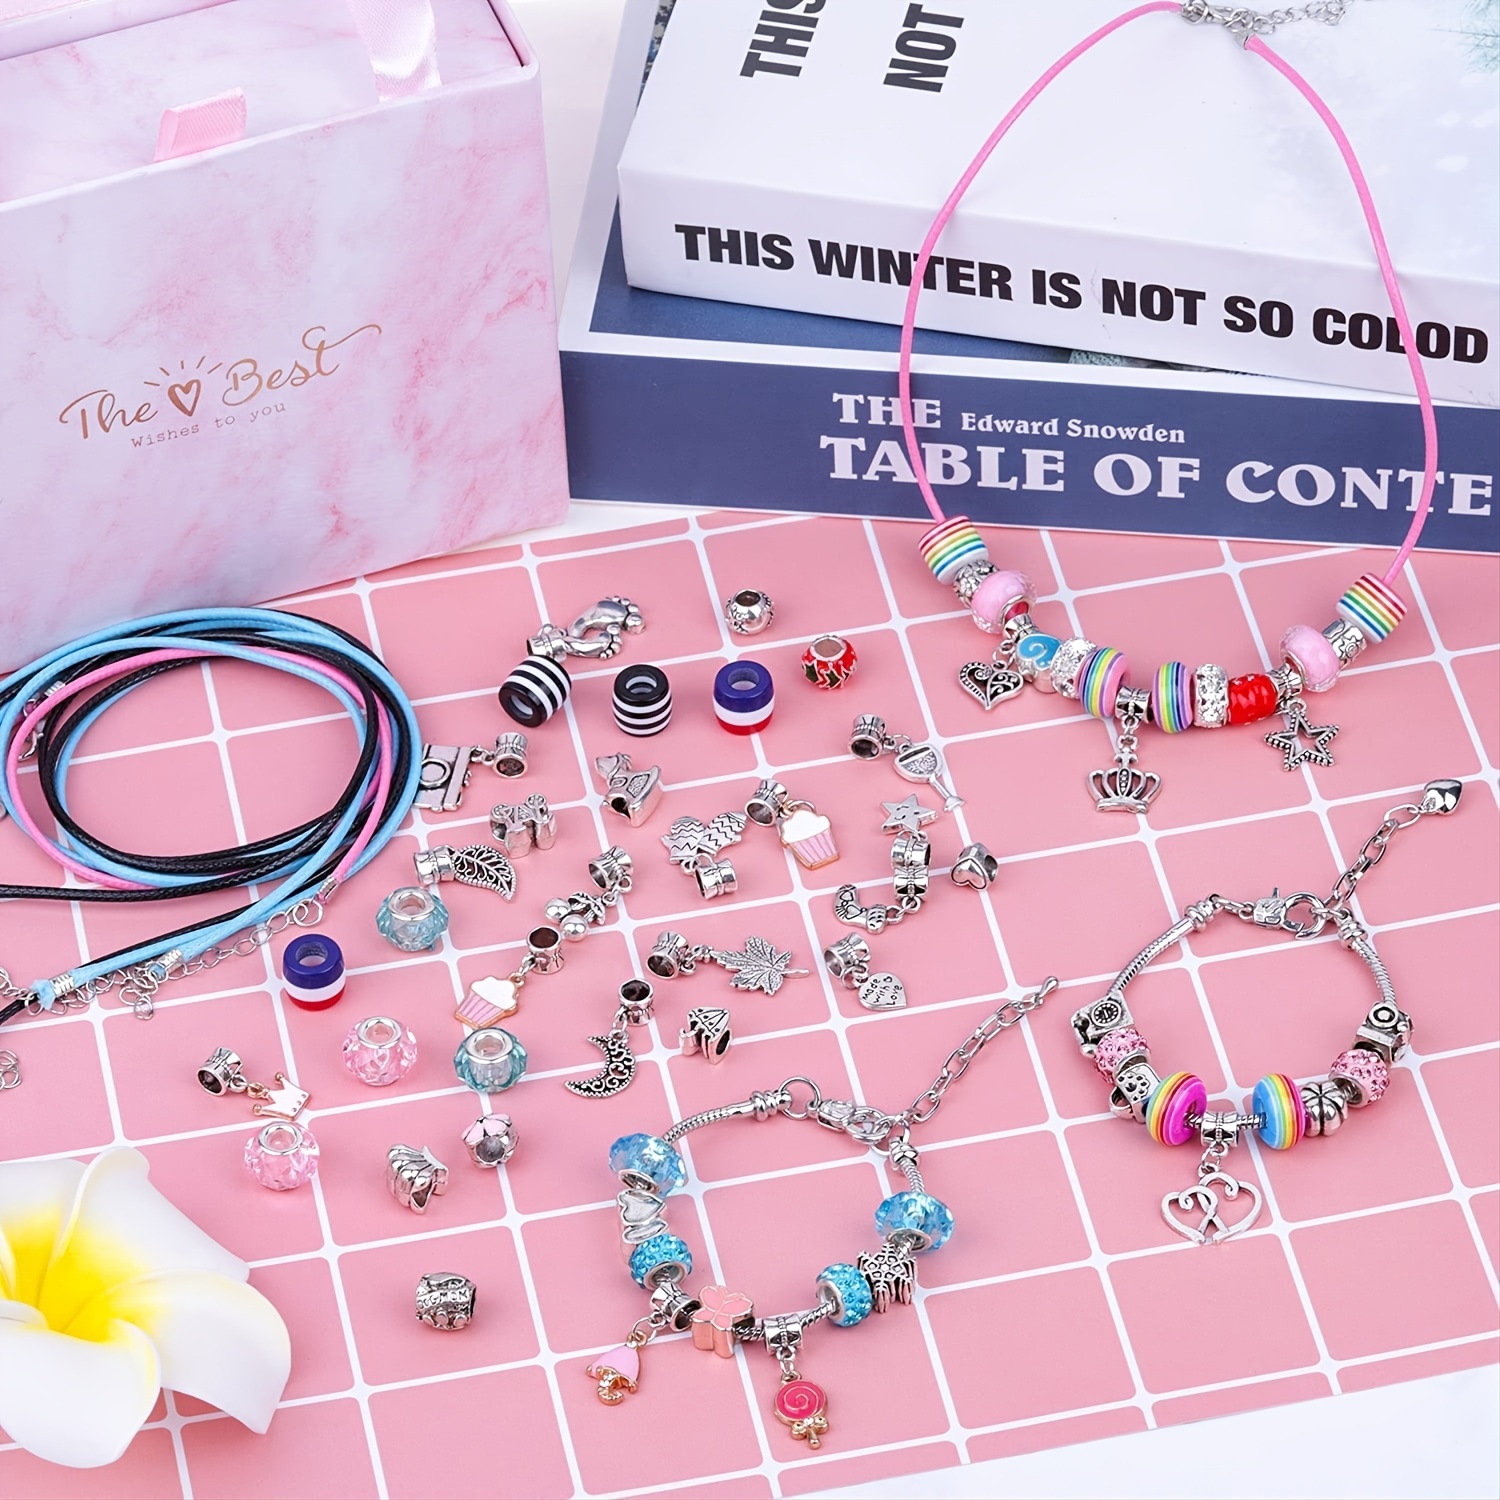 130 Pieces Charm Bracelet Making Kit Including Jewelry Beads Snake Chains,  DIY Craft for Girls, Jewelry Christmas Gift Set for Arts and Crafts for  Kids Ages 8-12 